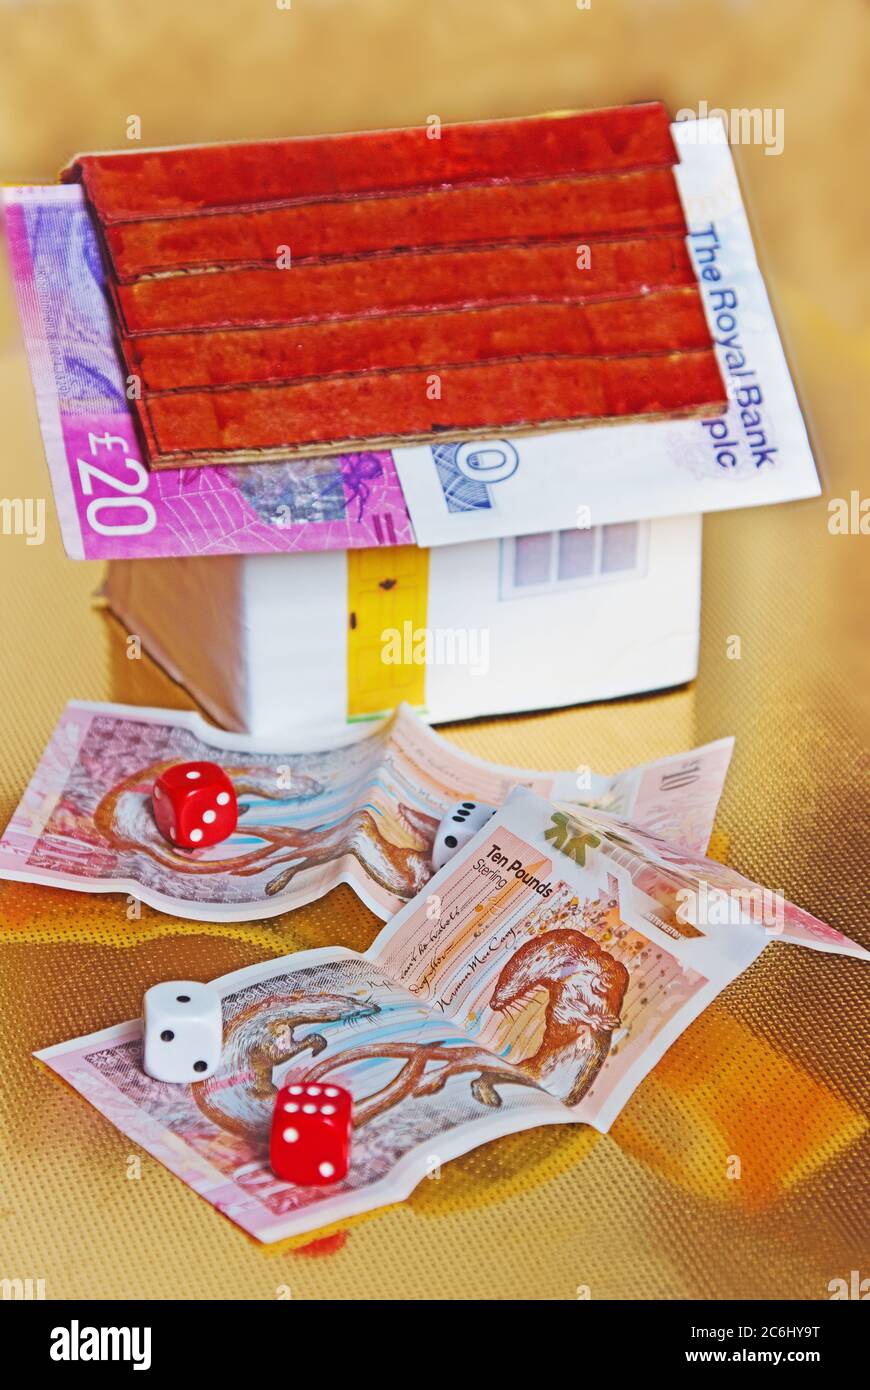 Financial concept image. money surrounding  Toy, House,   Idea cost of house, bought, savings discipline needed, target, costs of home ownership, affo Stock Photo